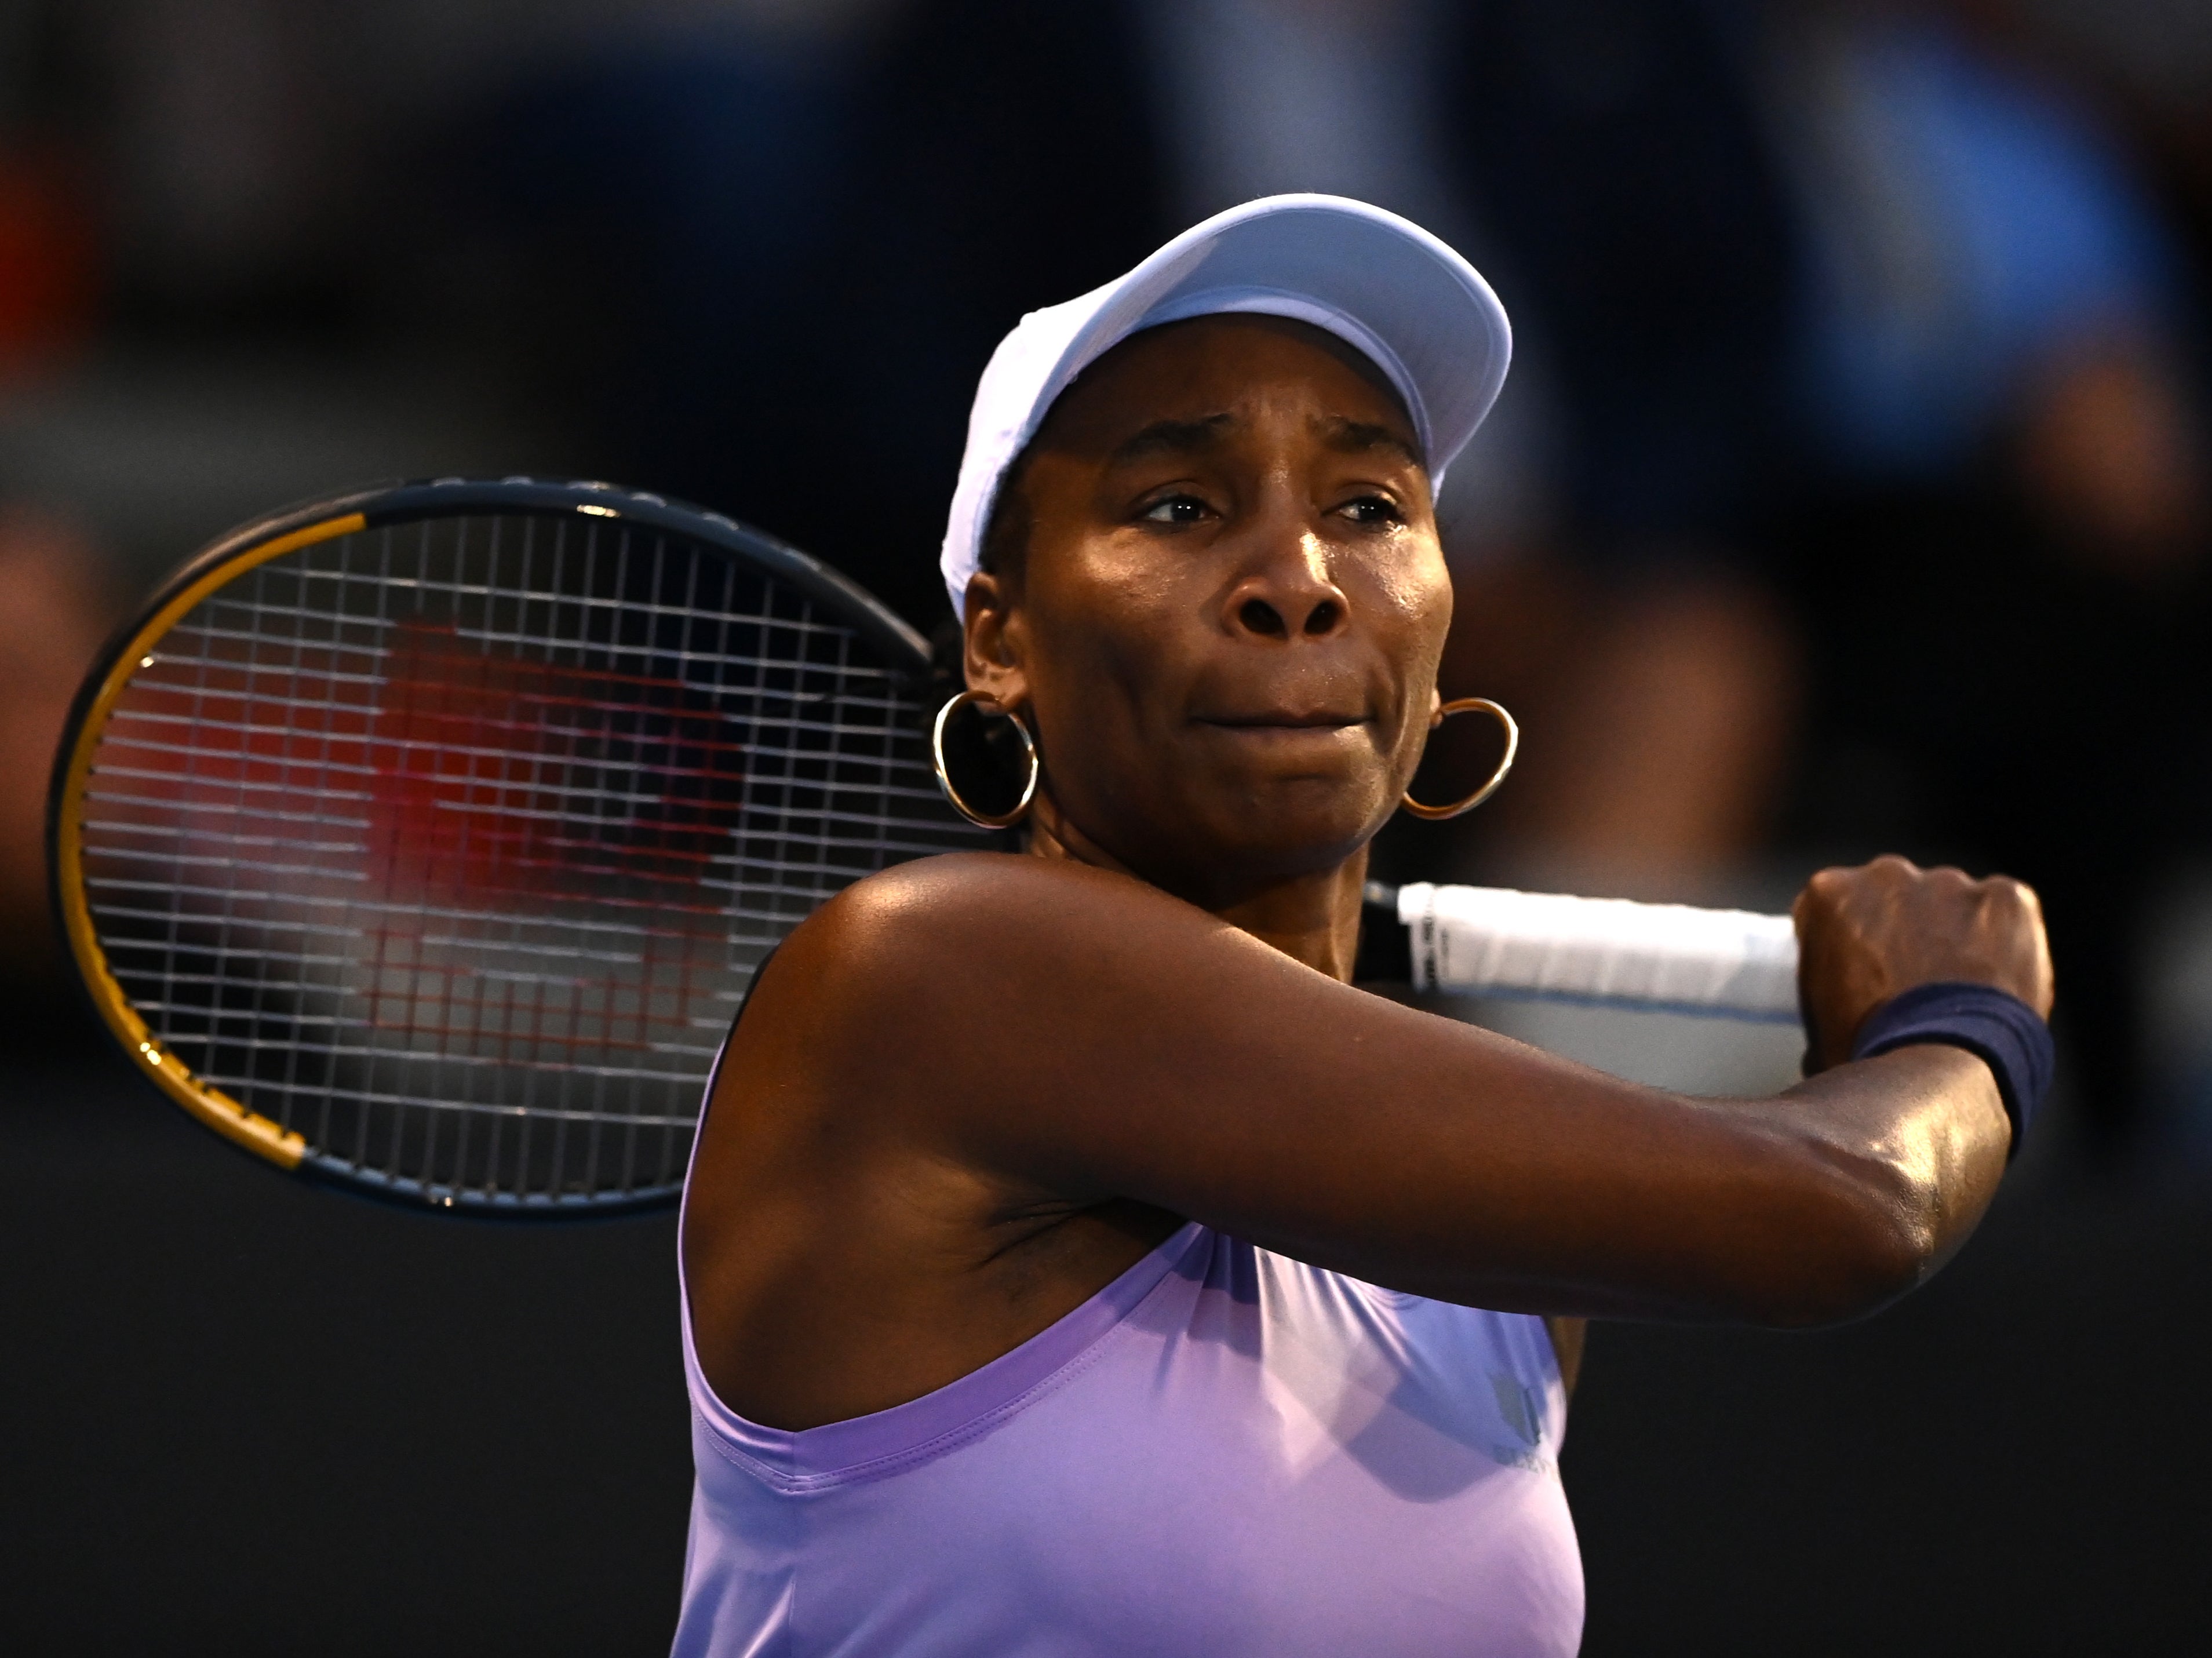 Venus Williams Net Worth - A Look Into The Tennis Star's Earnings